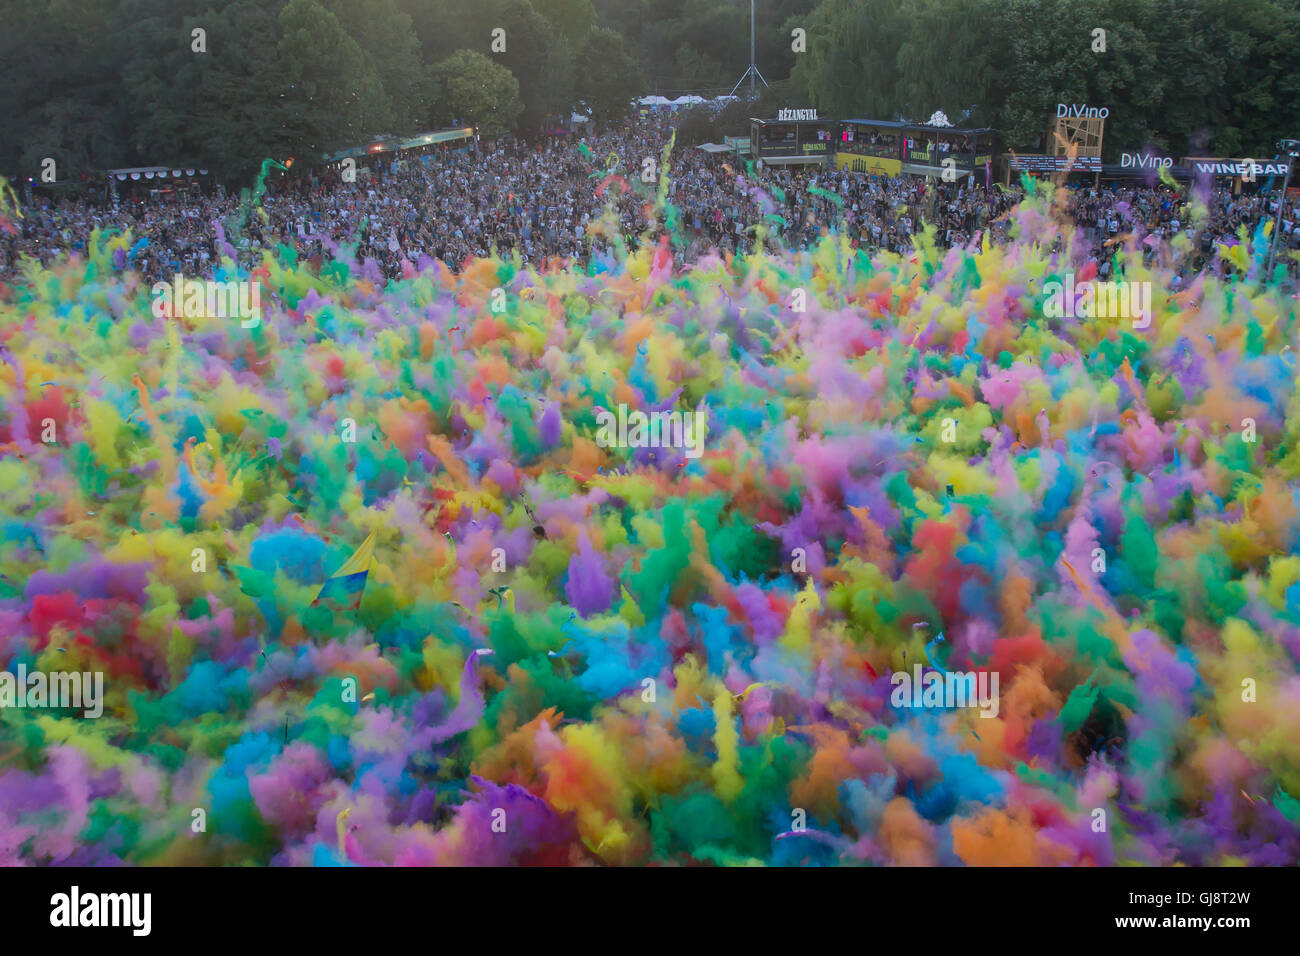 Budapest, Hungary. 13th Aug, 2016. Festival goers throw paint powder into the air during a Color Party of Sziget Festival on the Obuda Island in Budapest, Hungary, on Aug. 13, 2016. © Attila Volgyi/Xinhua/Alamy Live News Stock Photo